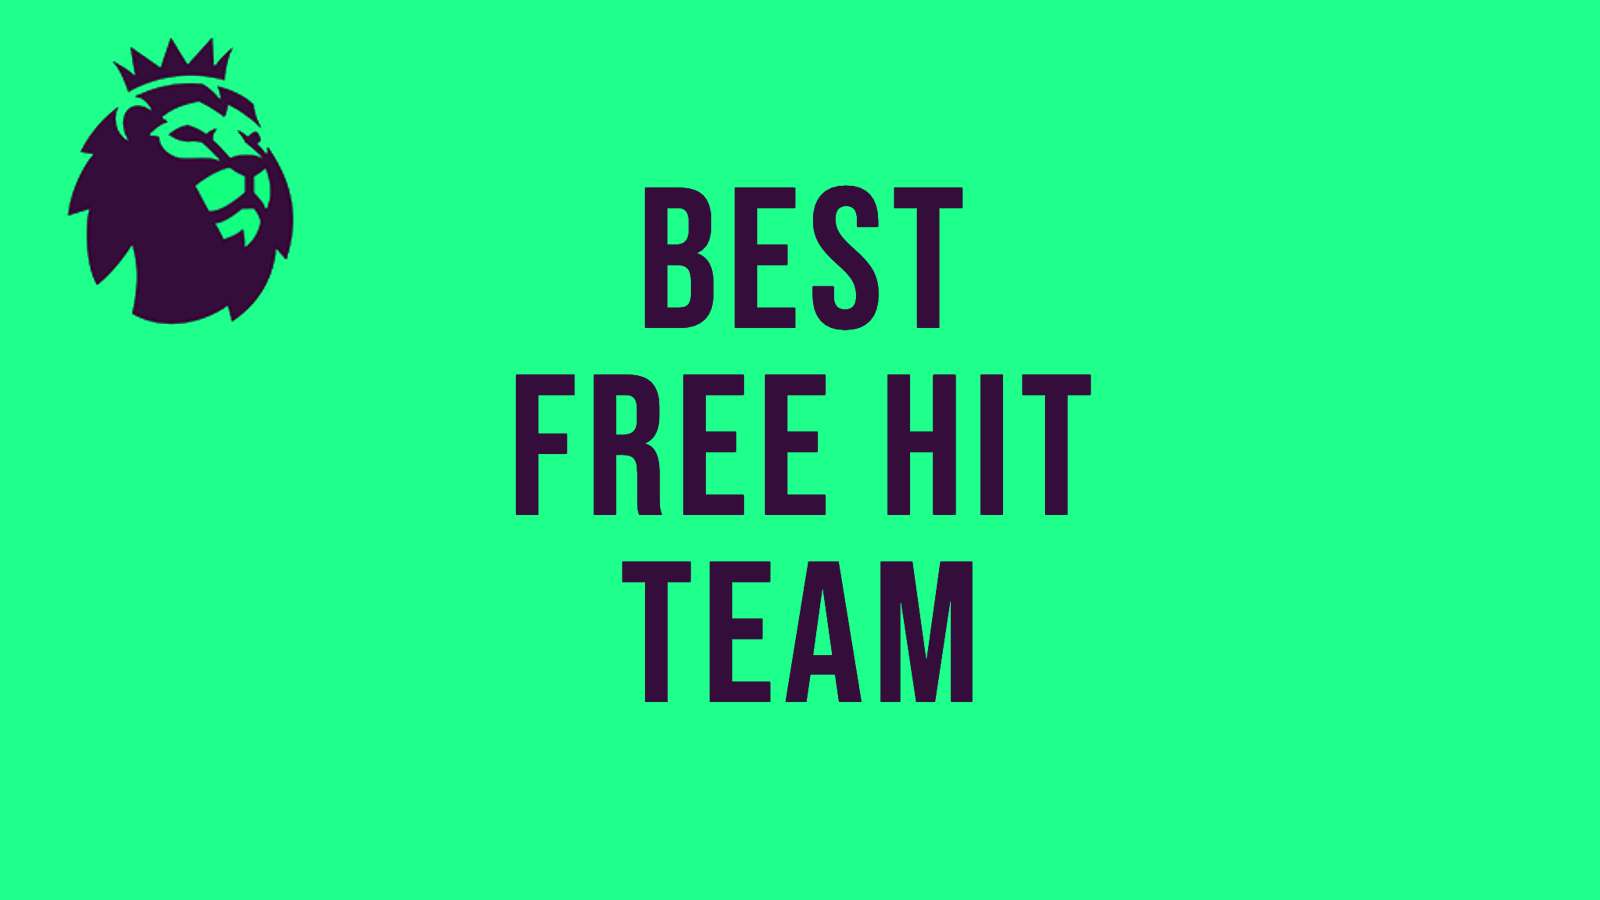 Best Free Hit team text on green background with FPL logo in top left corner